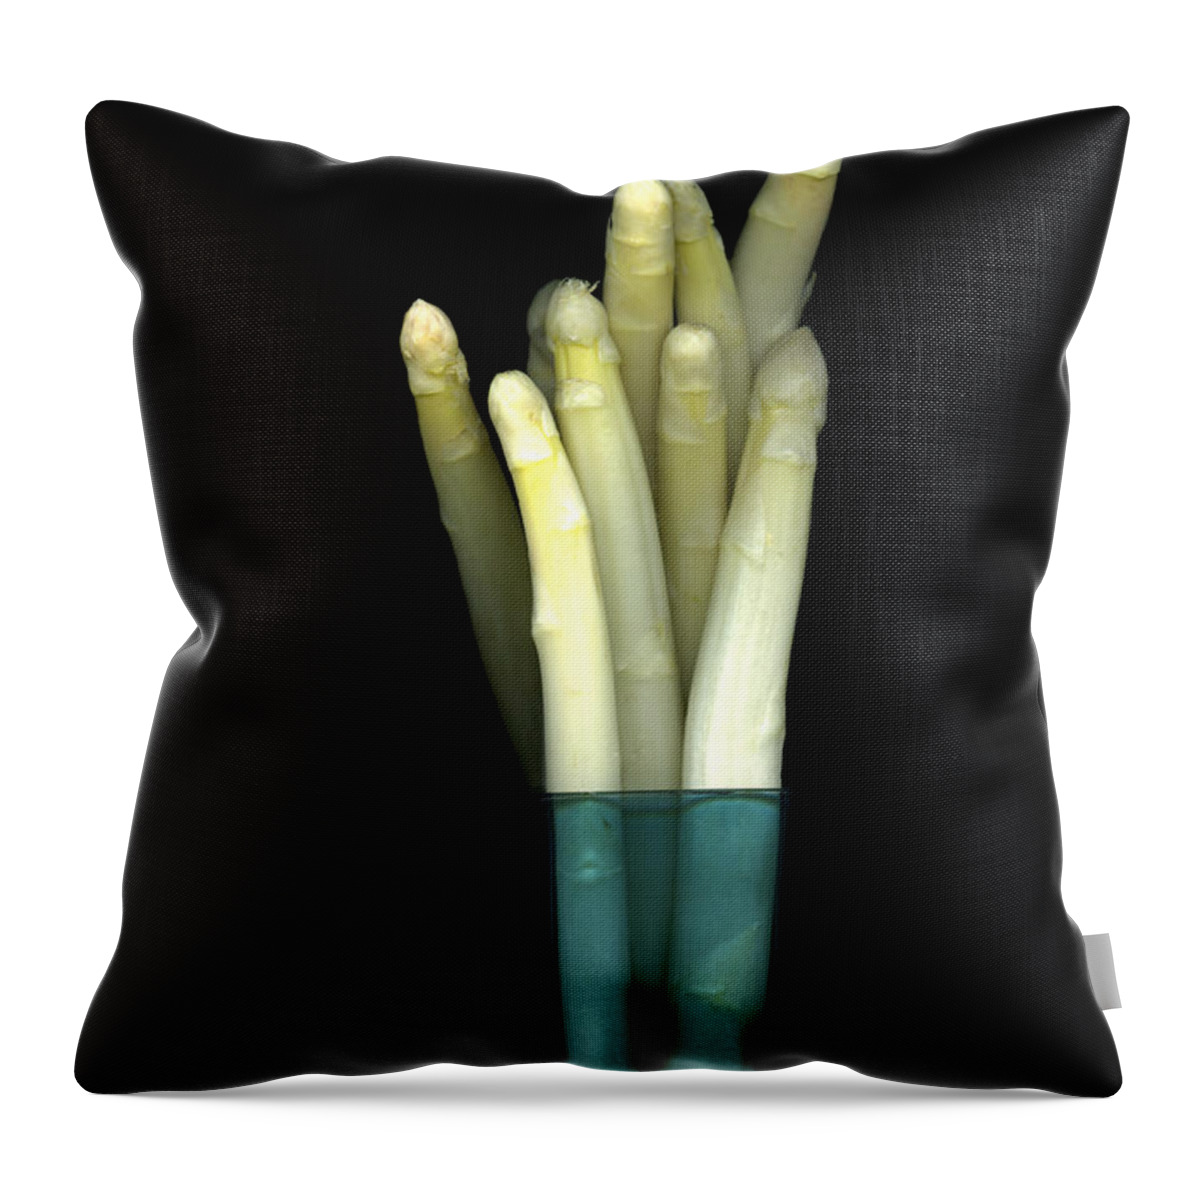  White Throw Pillow featuring the photograph White Asparugus by Christian Slanec